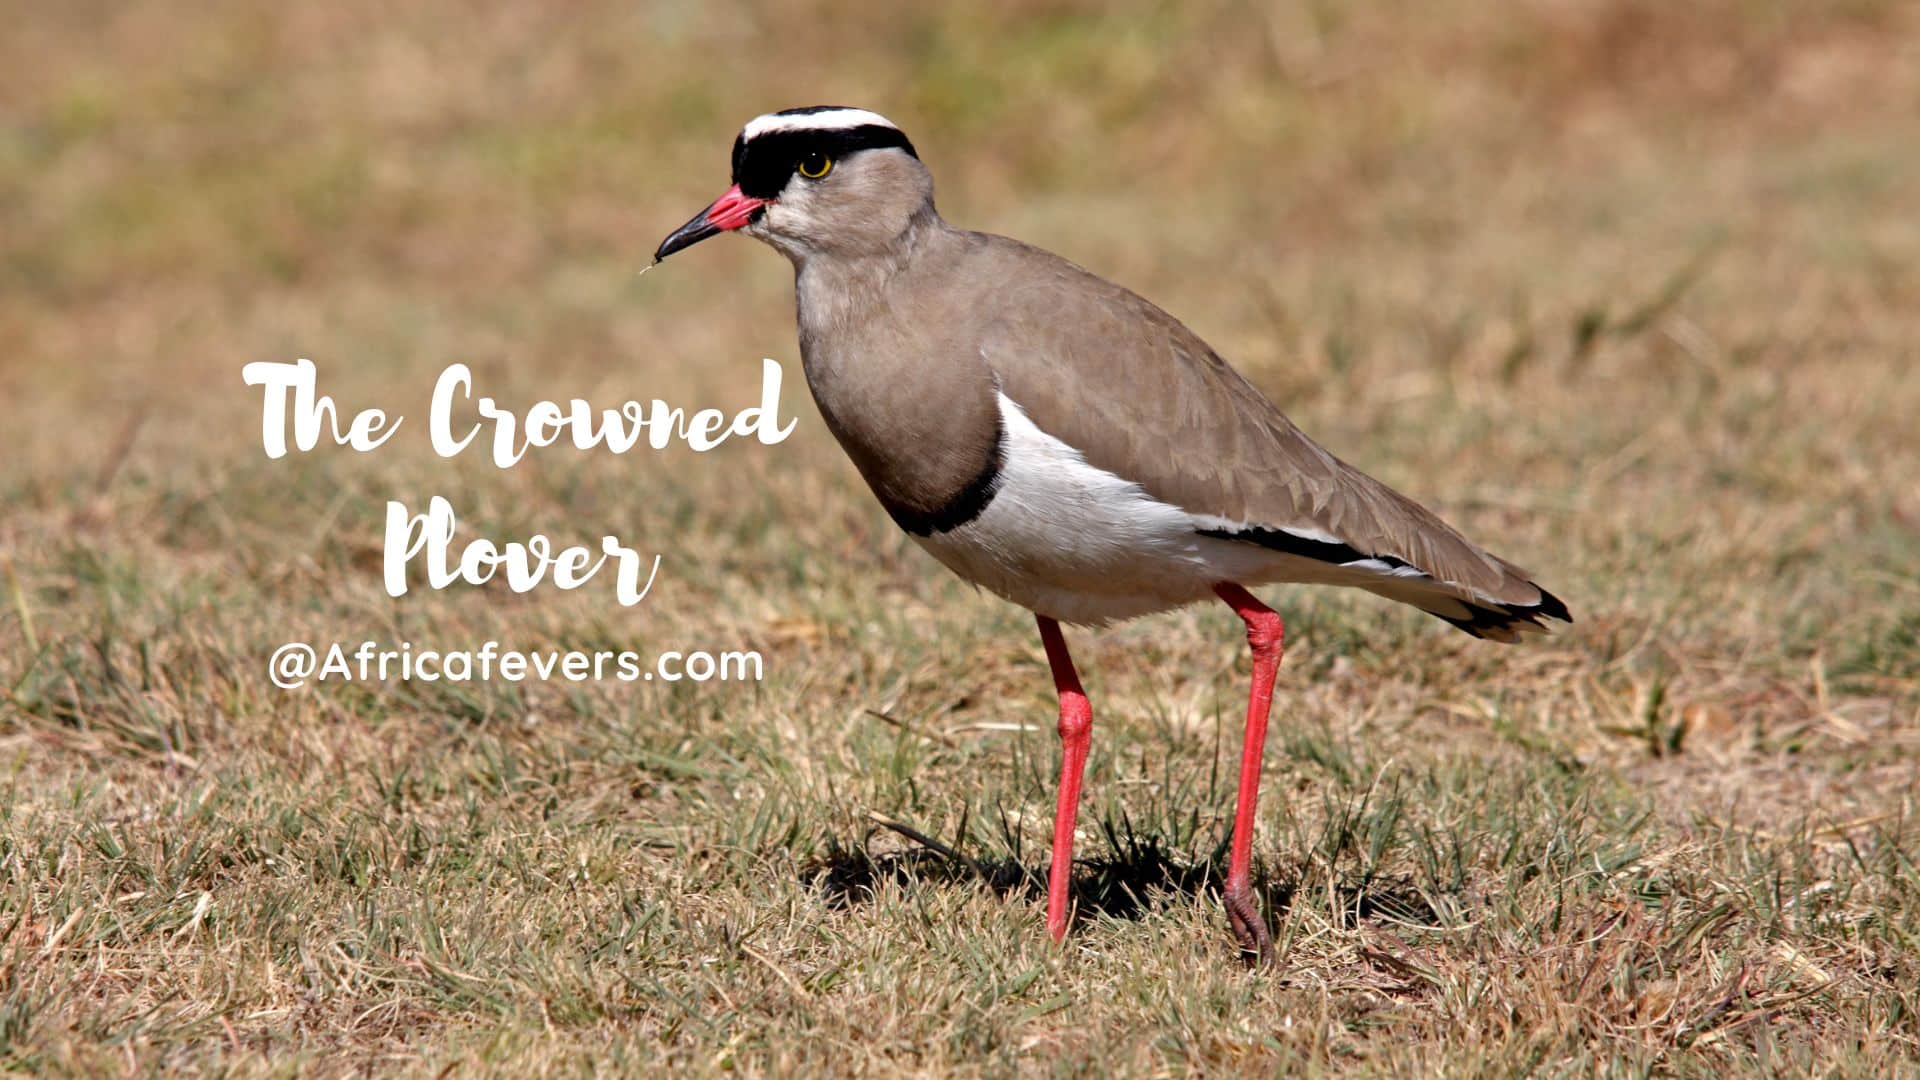 The Crowned Plover bird